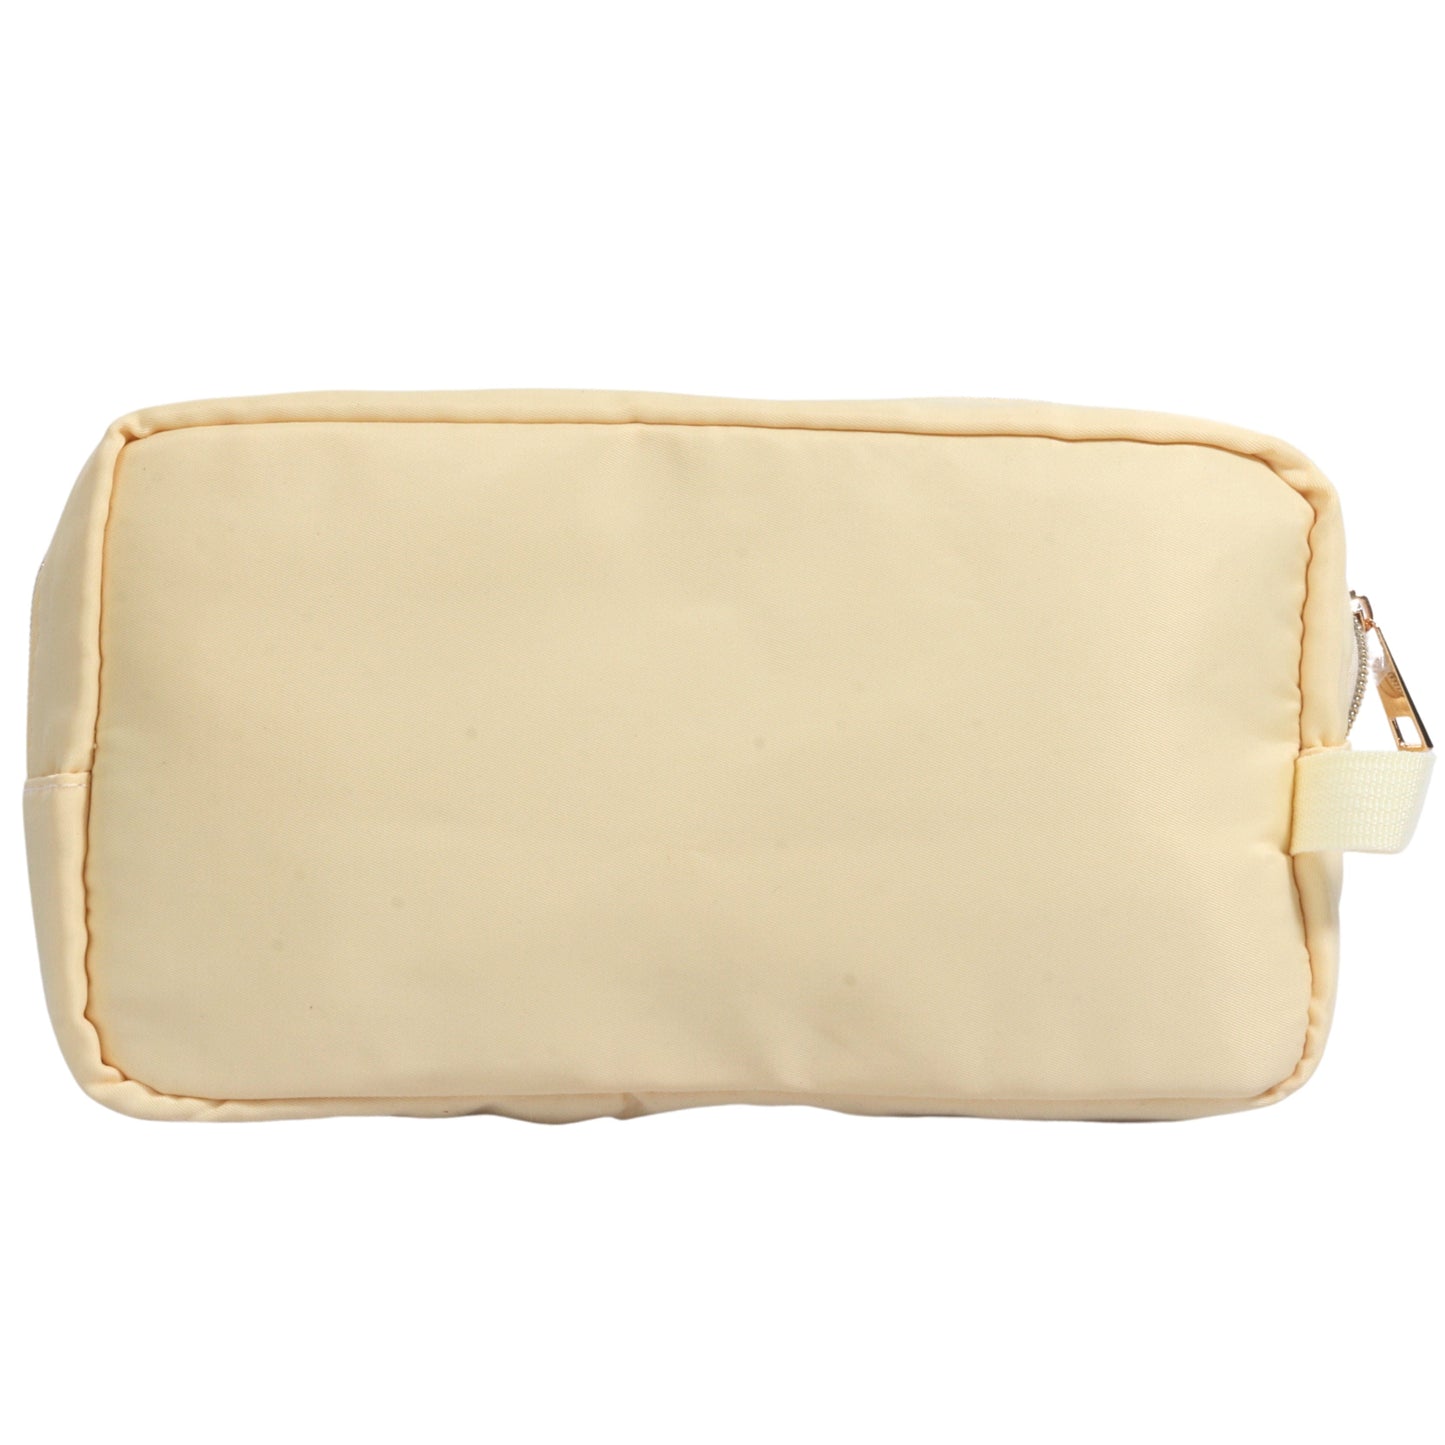 BRANDS & BEYOND Cosmetics Bags Yellow Preppy Makeup Bag With Strap